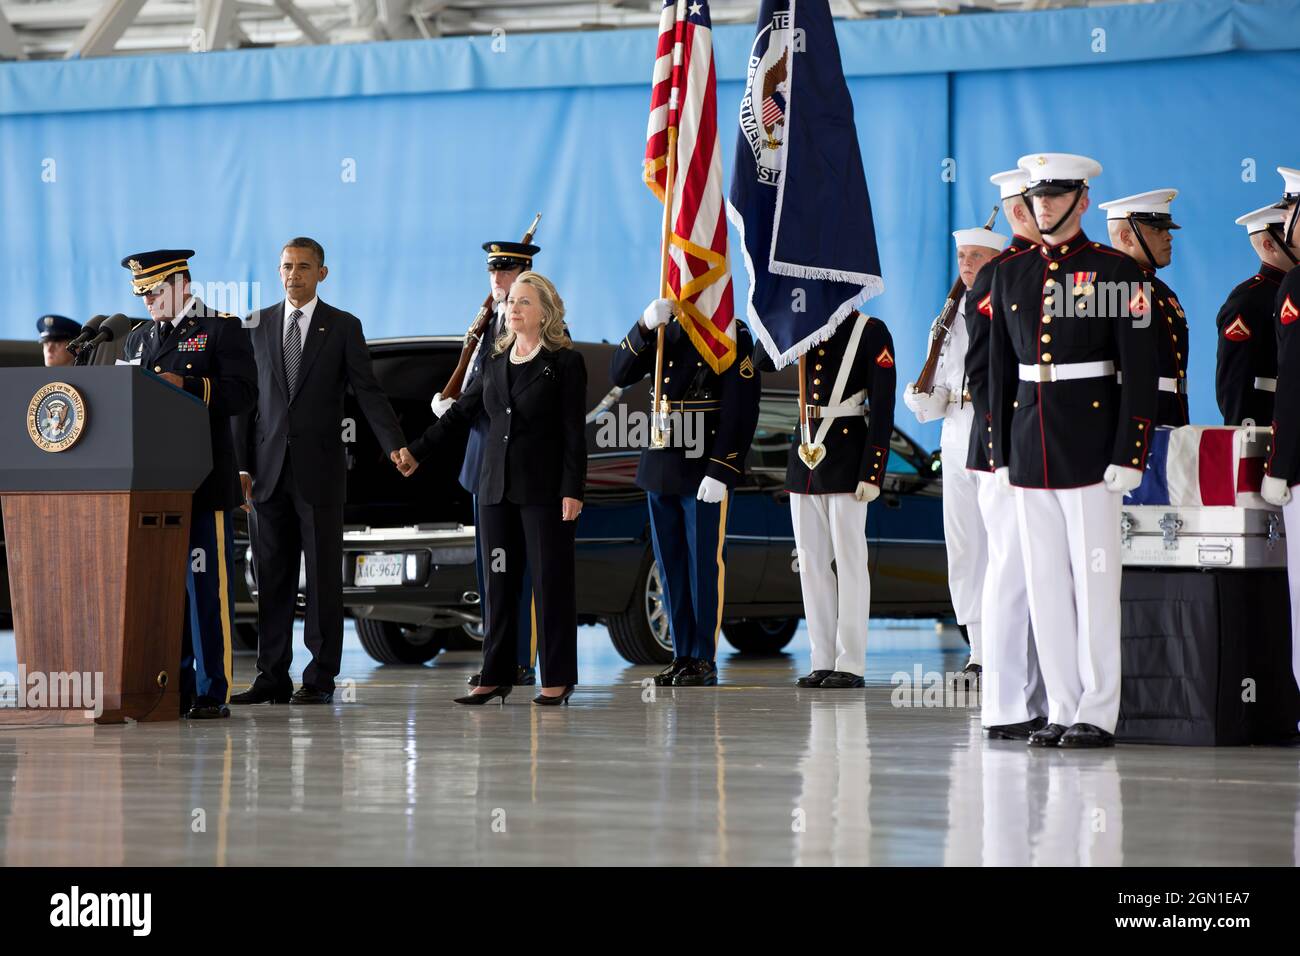 President Barack Obama stands with Secretary of State Hillary Rodham Clinton during the transfer of remains ceremony at Joint Base Andrews, Md., Sept. 14, 2012, marking the return to the United States of the remains of the four Americans killed in Benghazi, Libya. (Official White House Photo by Pete Souza) President Barack Obama stands with Secretary of State Hillary Rodham Clinton during the transfer of remains ceremony at Joint Base Andrews, Md., Sept. 14, 2012, marking the return to the United States of the remains of J. Christopher Stevens, U.S. Ambassador to Libya; Sean Smith, Information Stock Photo